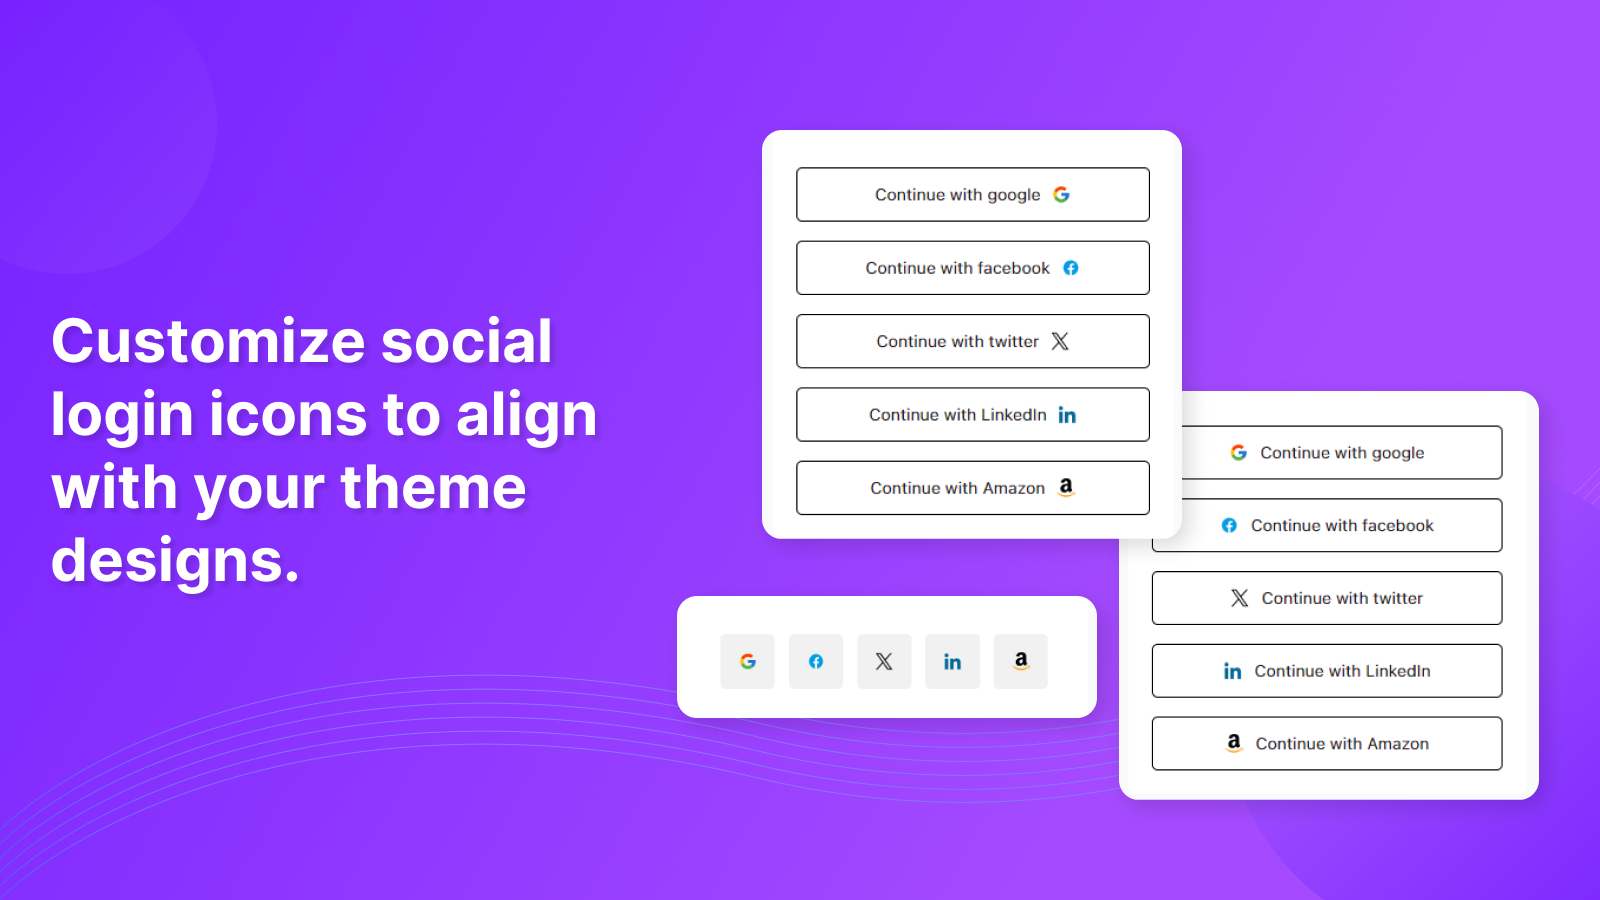 Customize social login icons to align with your theme designs.